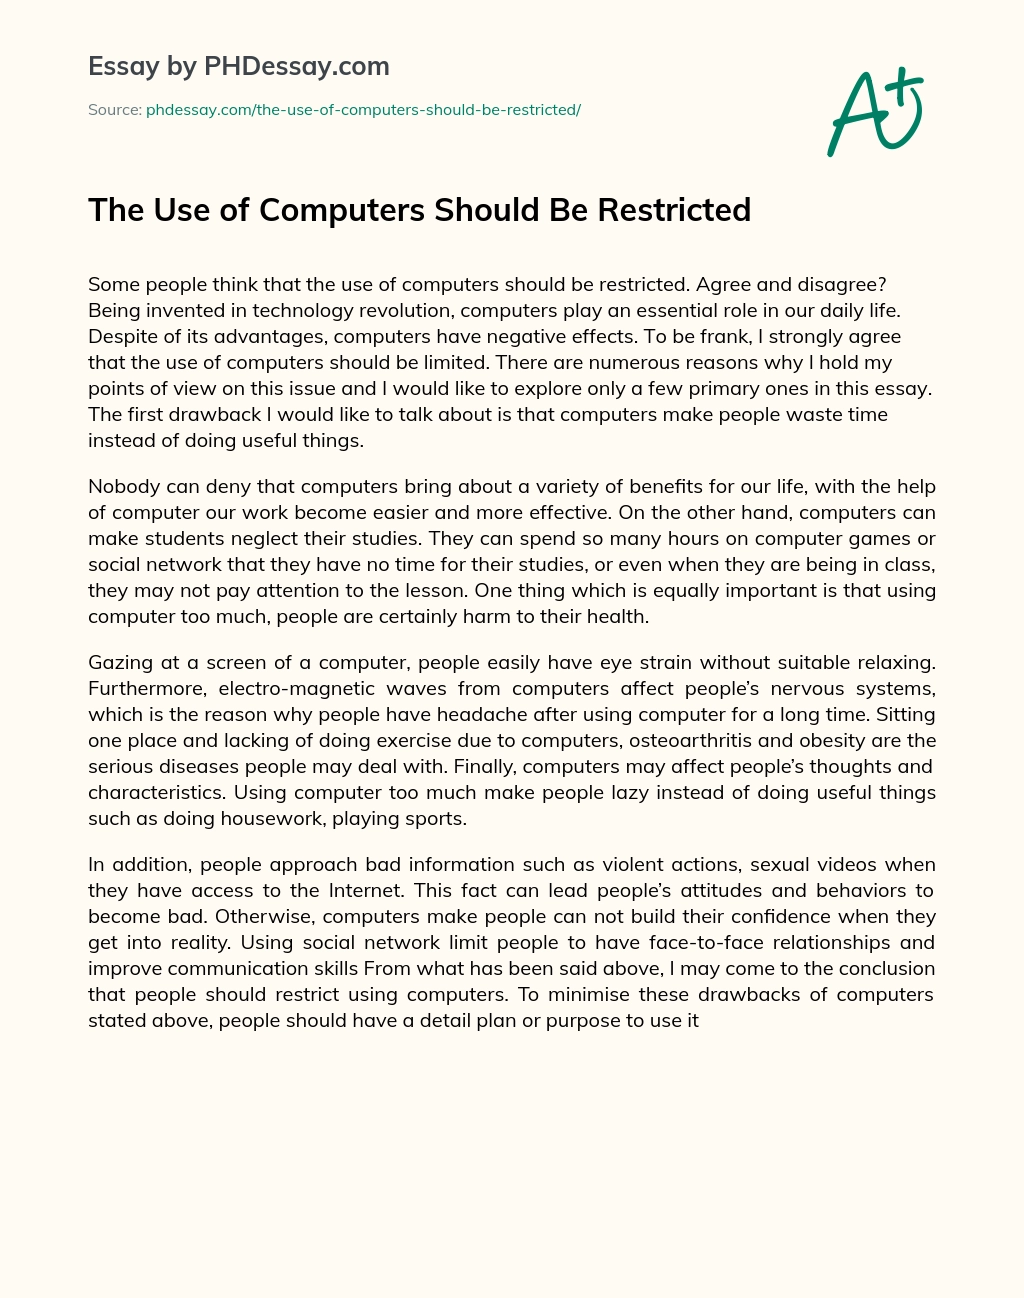 The Use of Computers Should Be Restricted essay